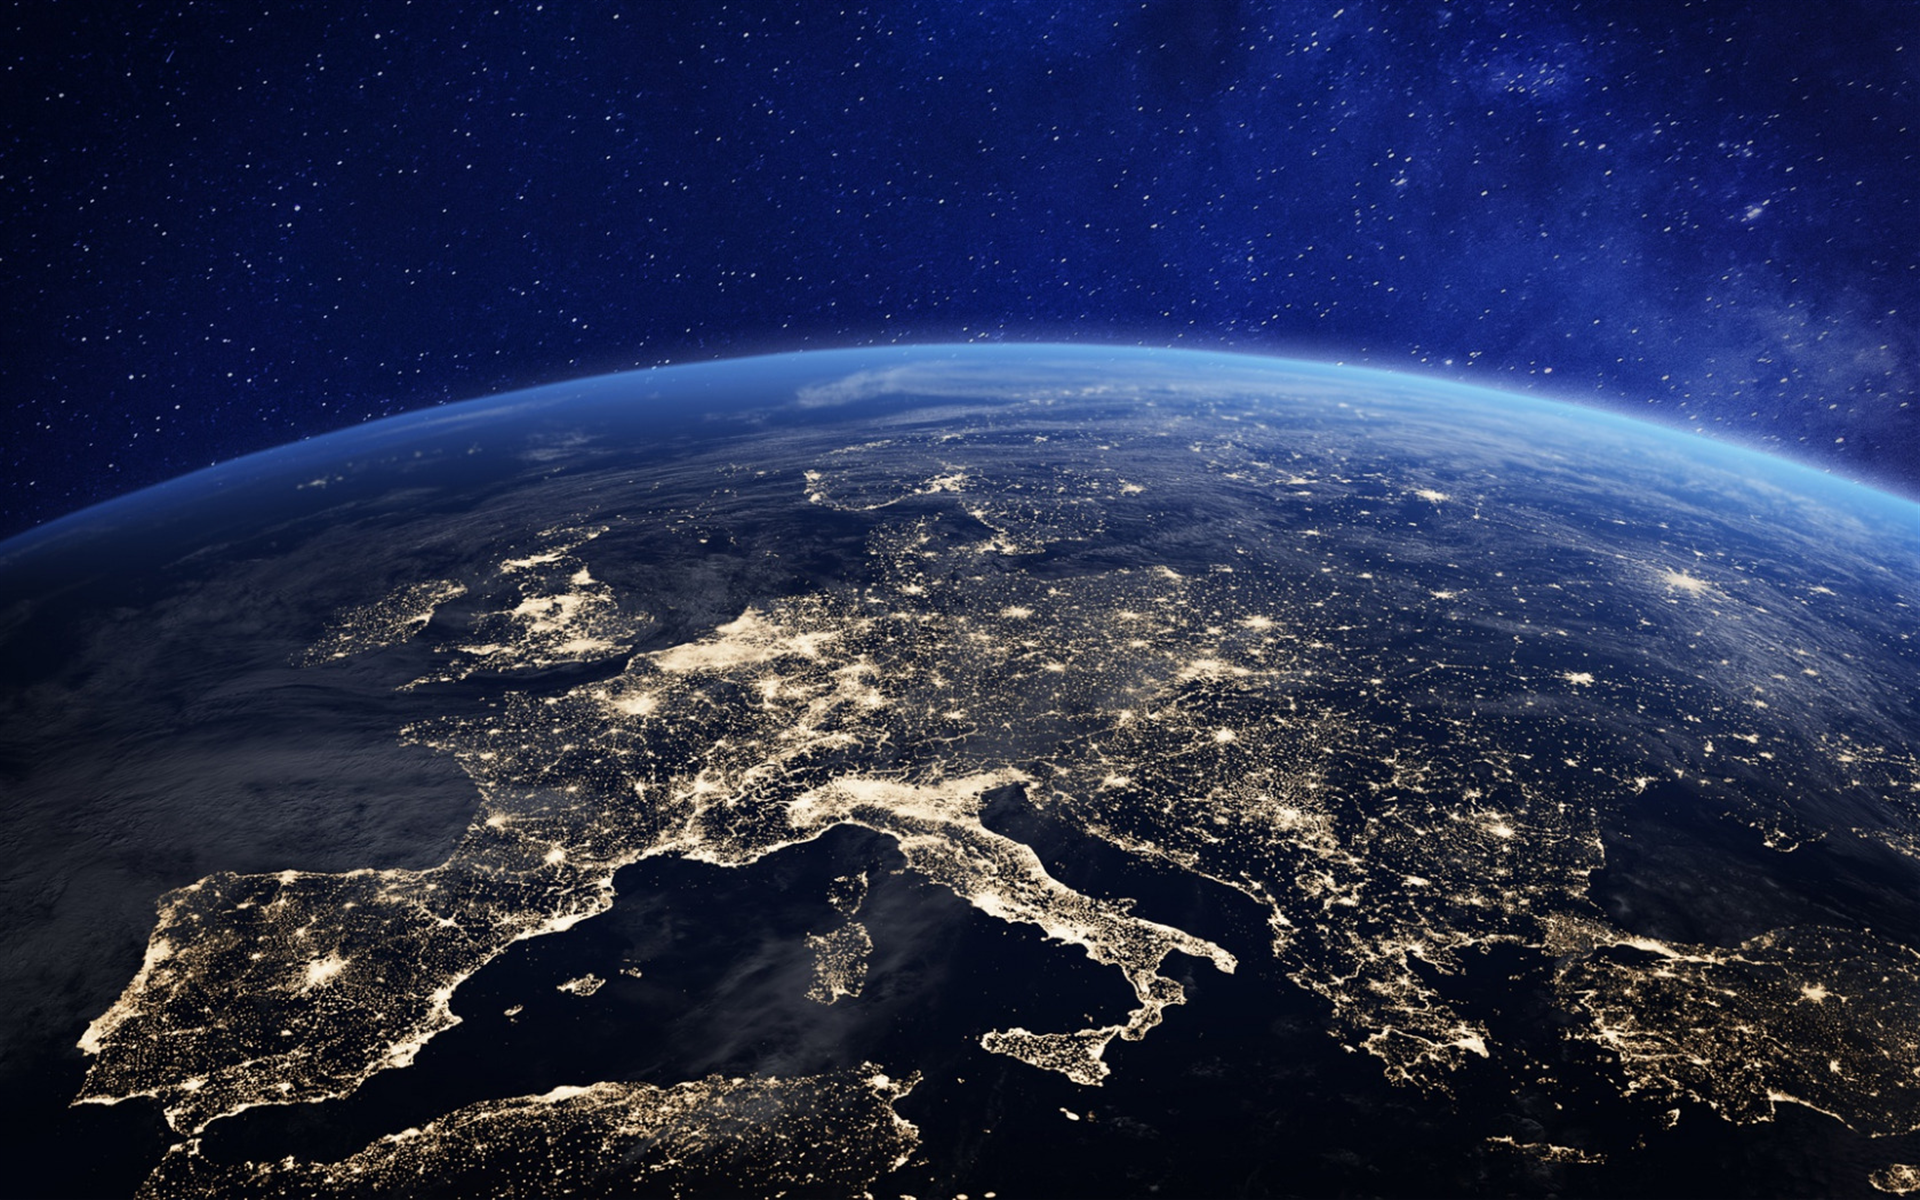 Download wallpapers Earth at night from space Europe city lights  continent satellite view Earth for desktop with resolution 1920x1200 High  Quality HD pictures wallpapers